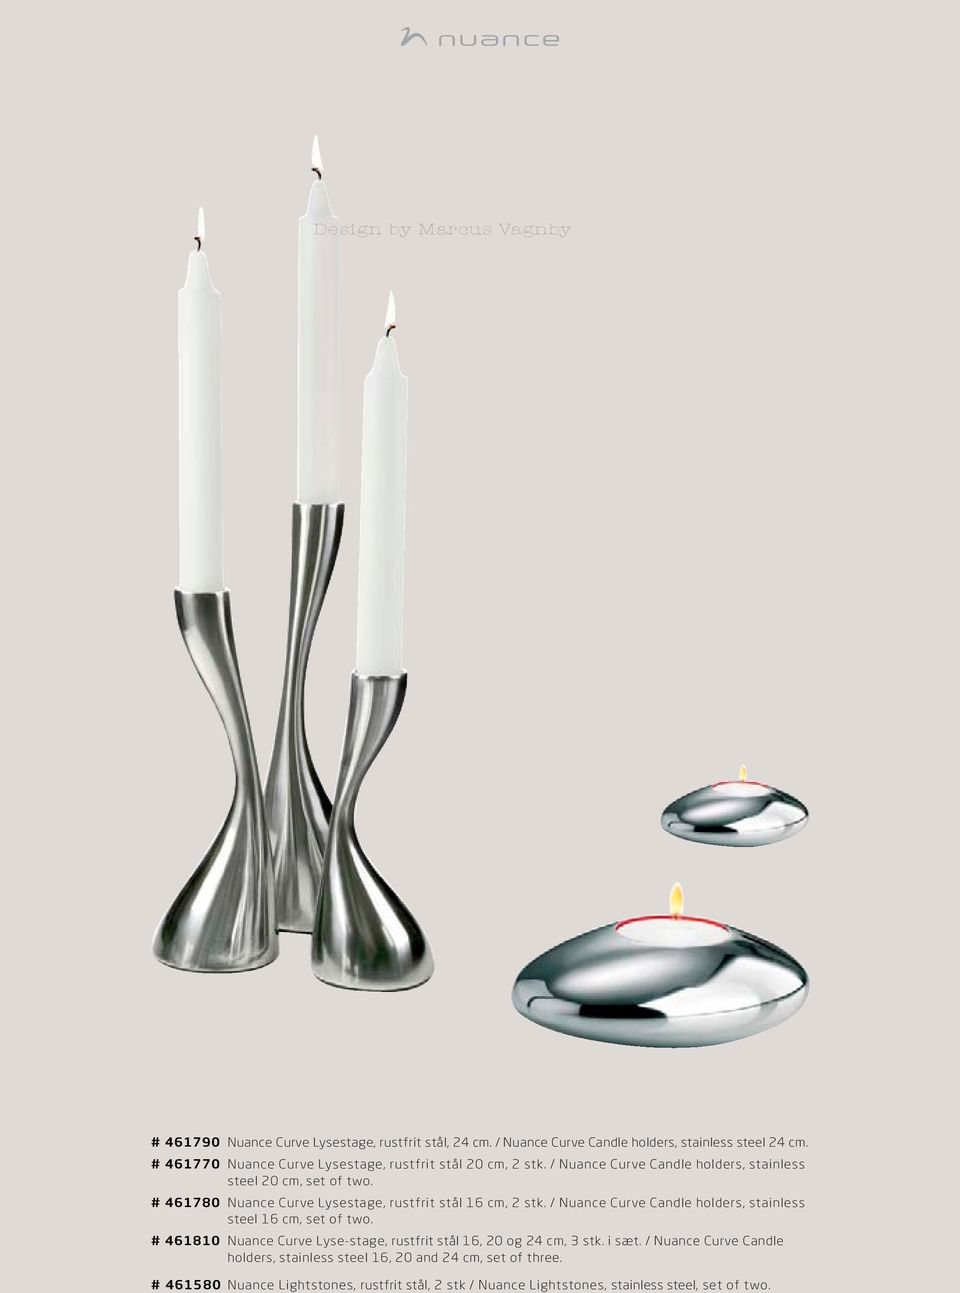 # 461780 Nuance Curve Lysestage, rustfrit stål 16 cm, 2 stk. / Nuance Curve Candle holders, stainless steel 16 cm, set of two.